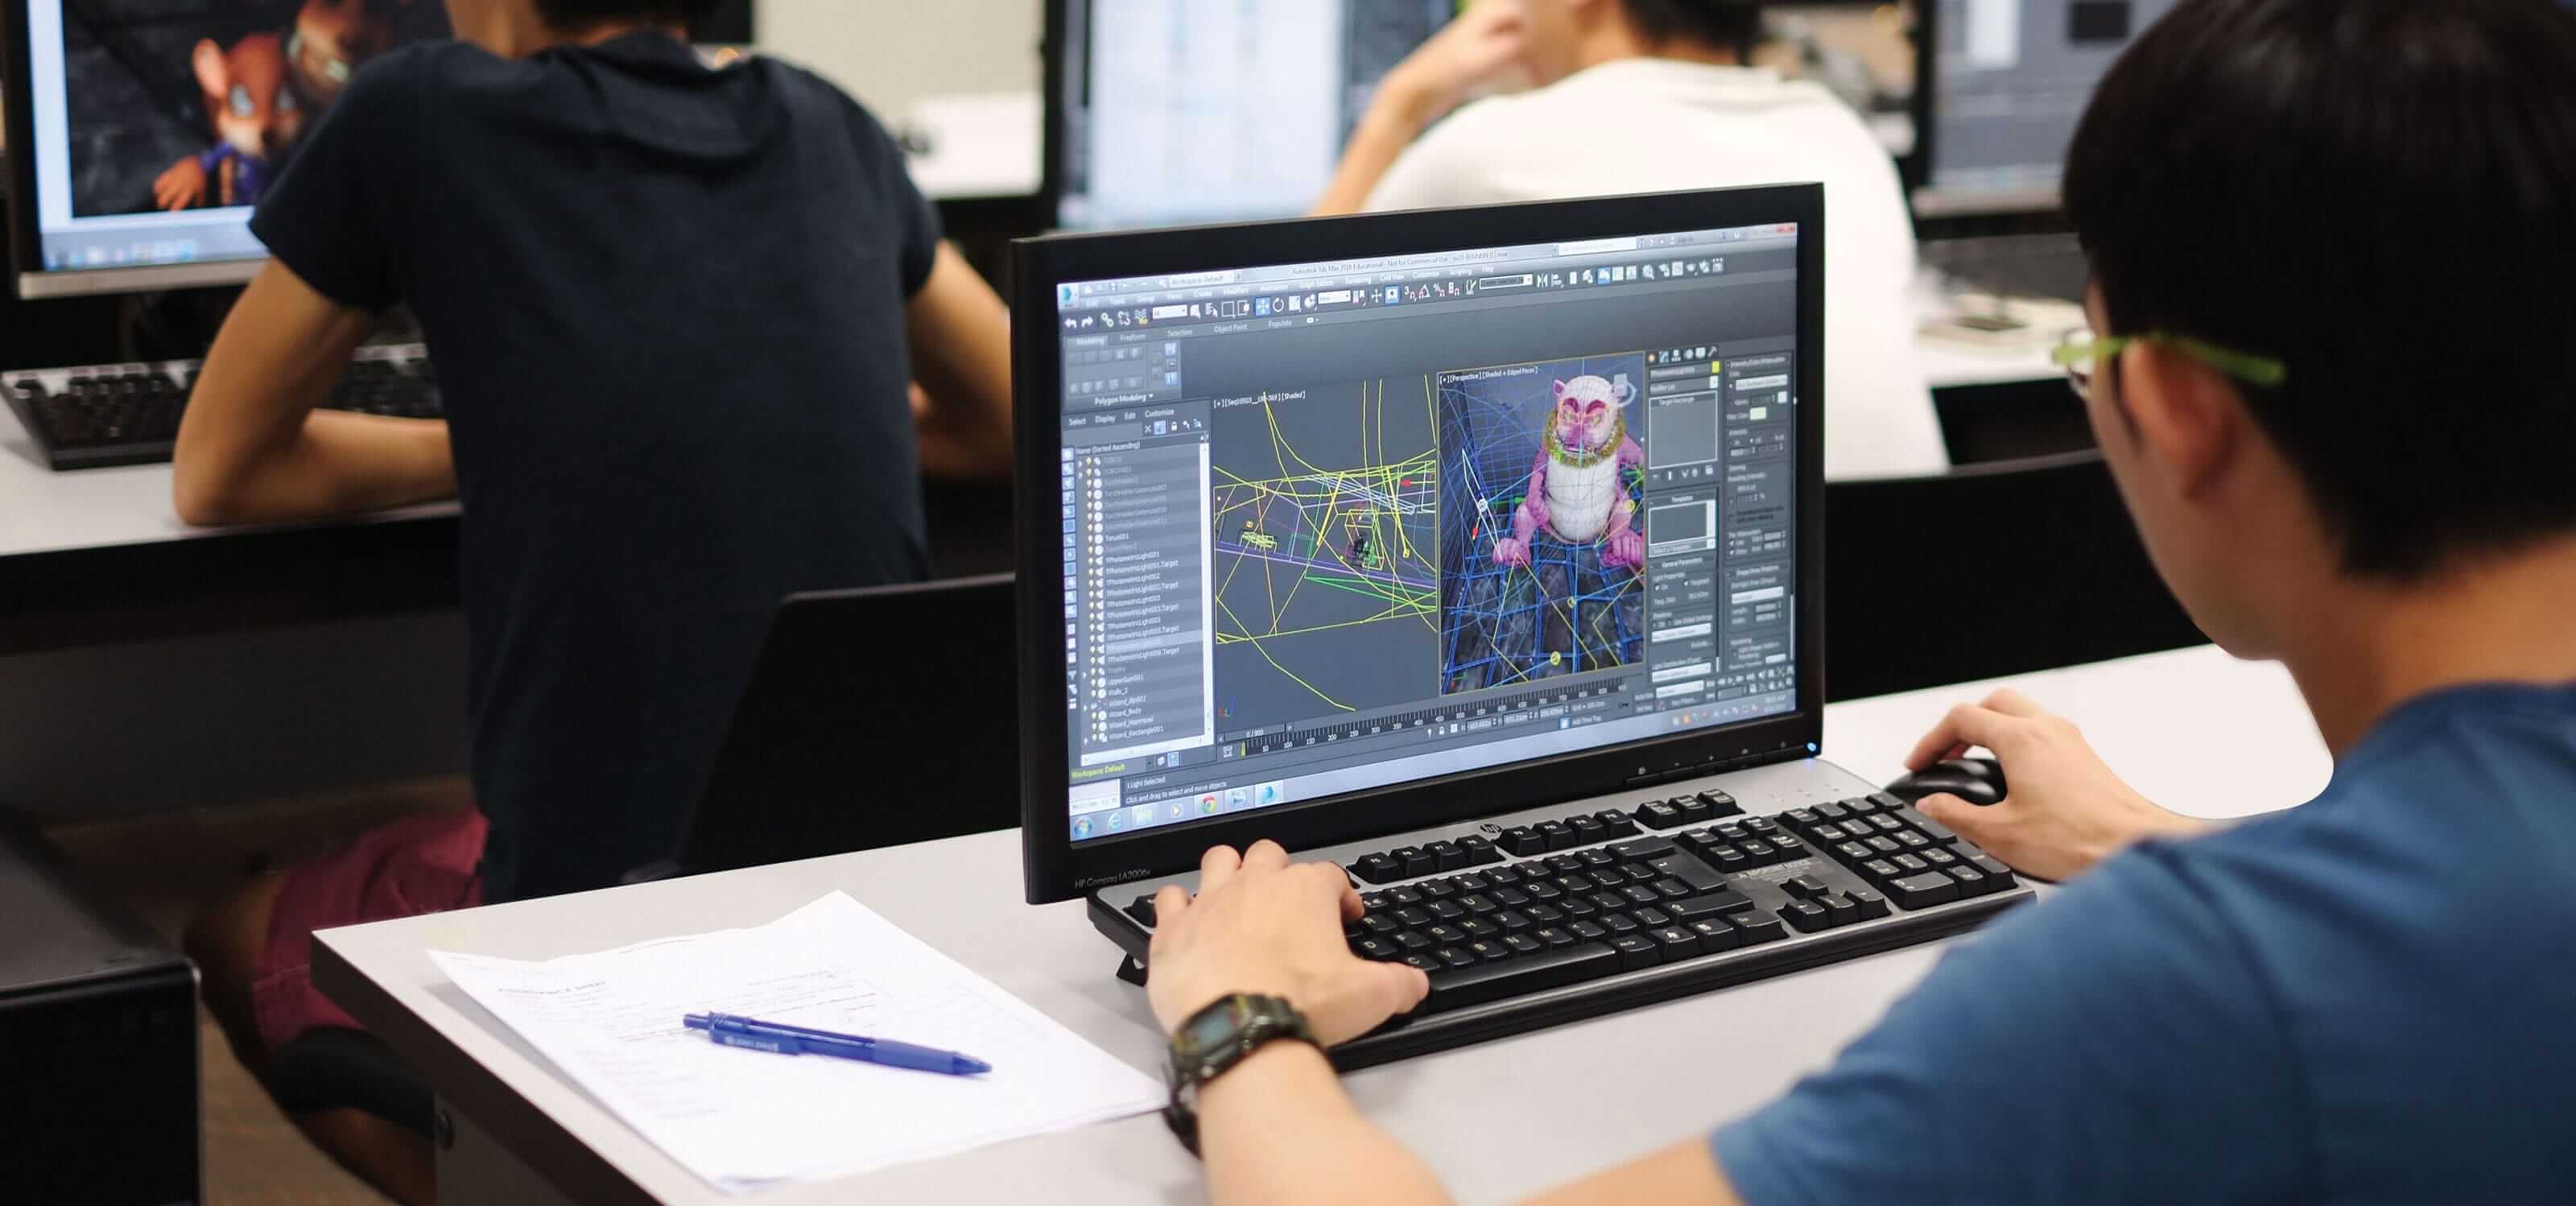 Looking over the shoulder of a DigiPen (Singapore) student as he creates a 3D model of an animal on a computer